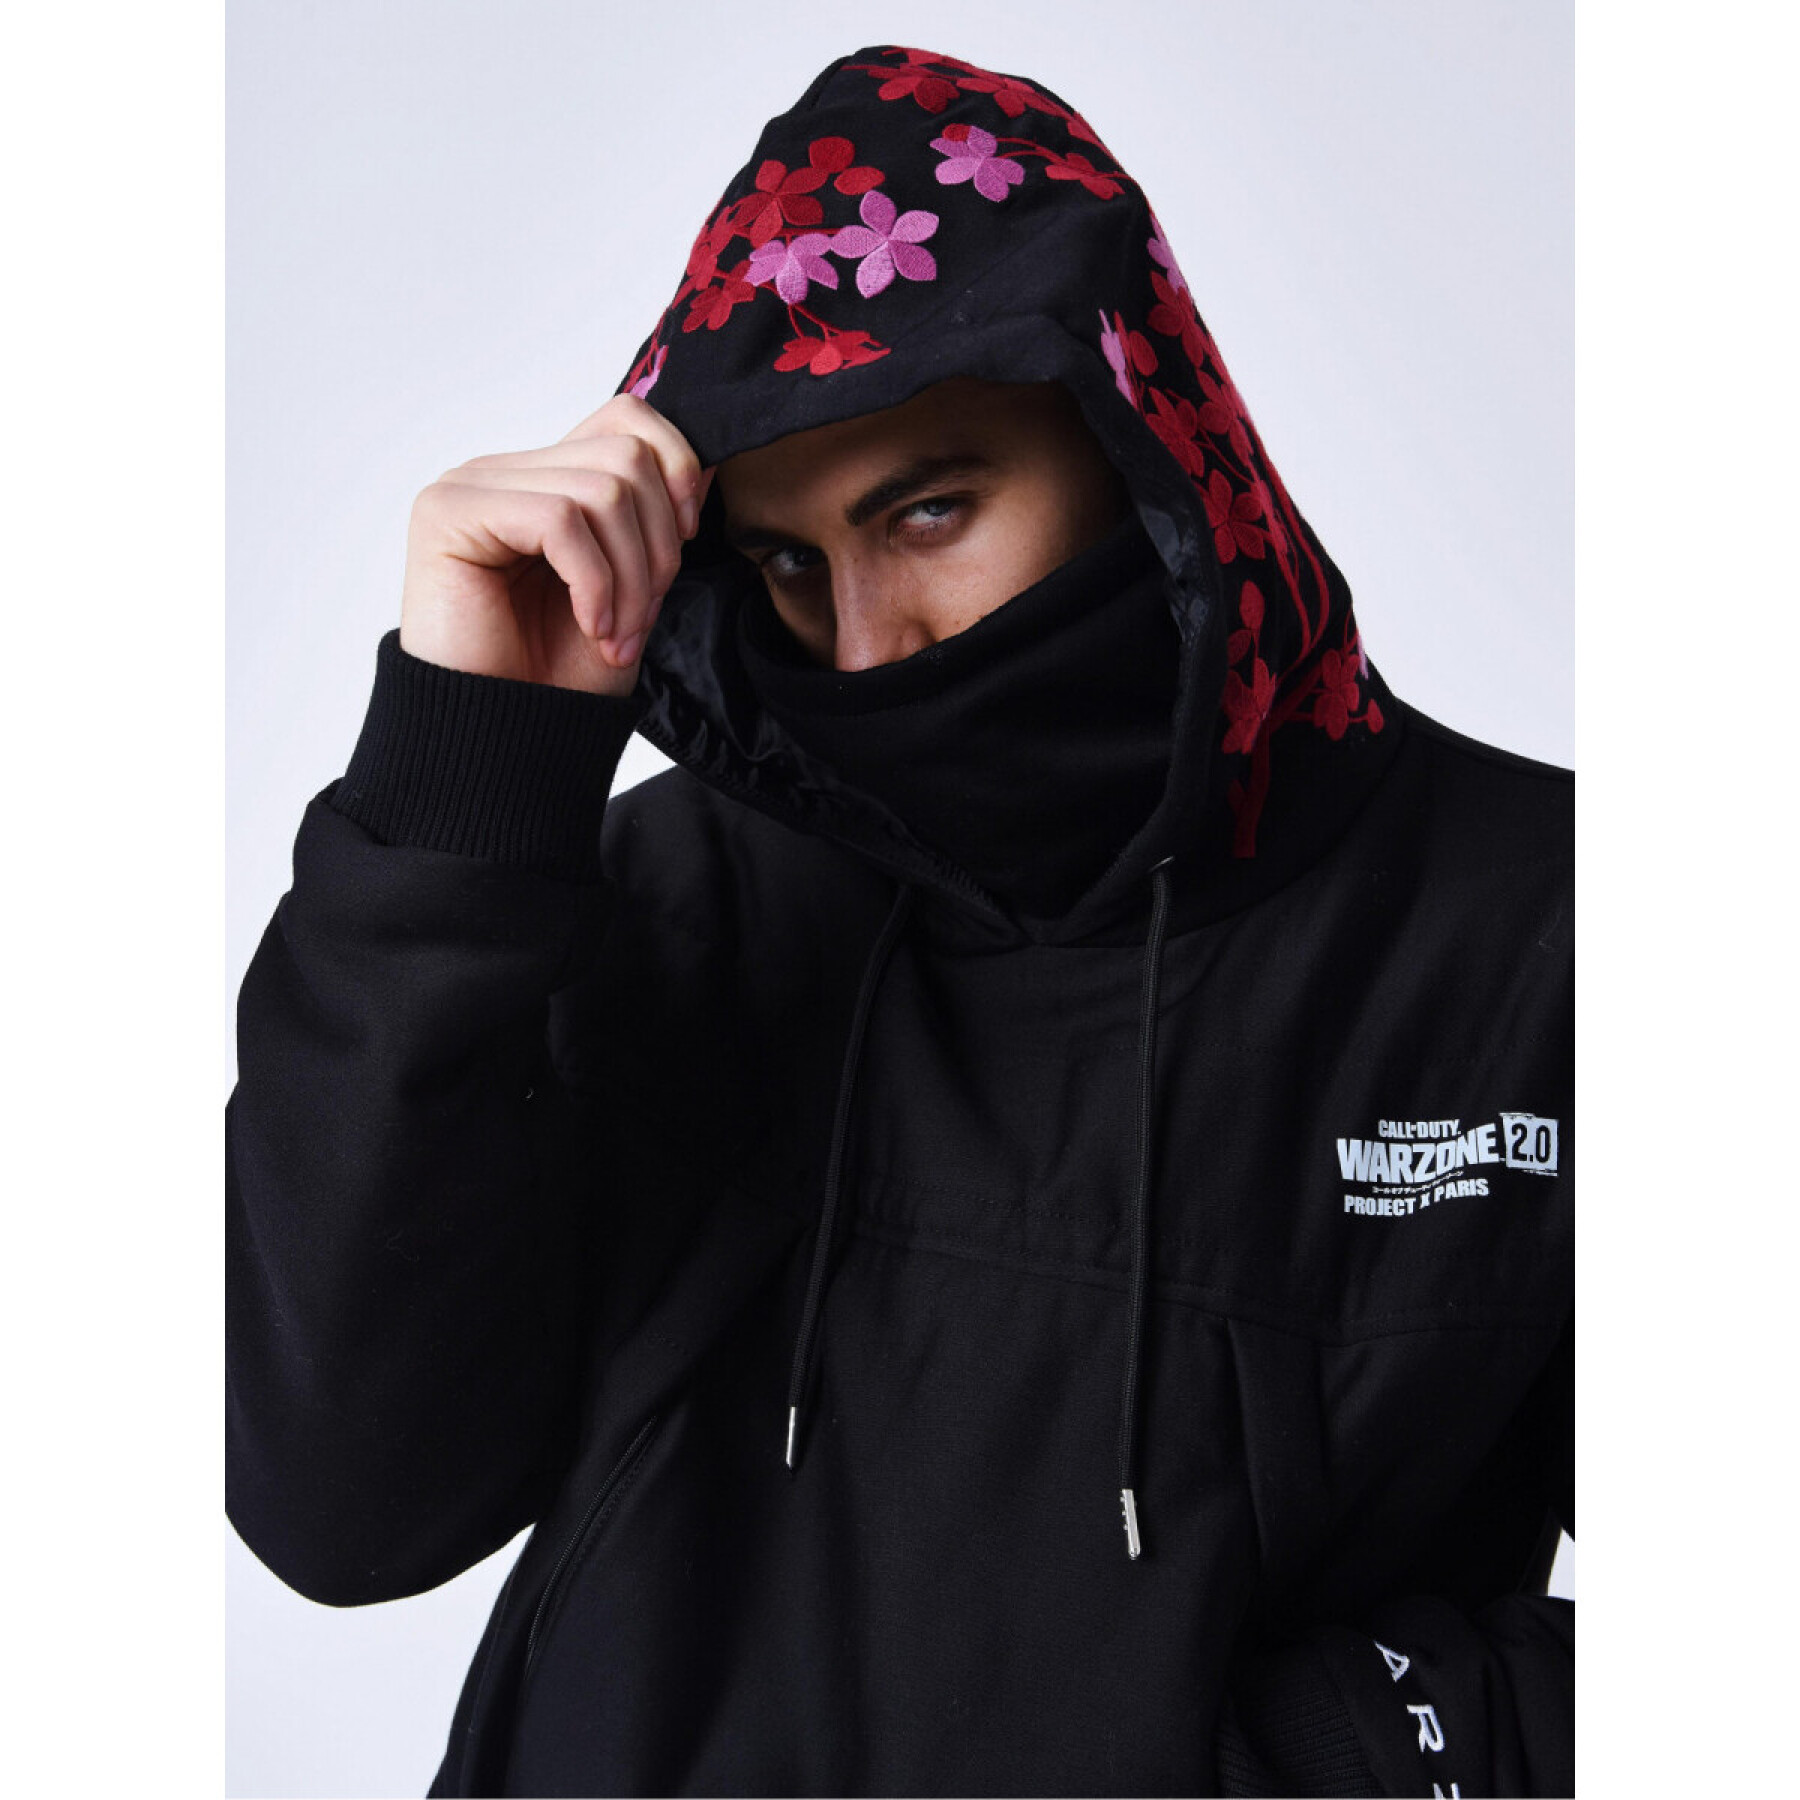 Hooded jacket with sakura embroidery Project X Paris Call Of Duty